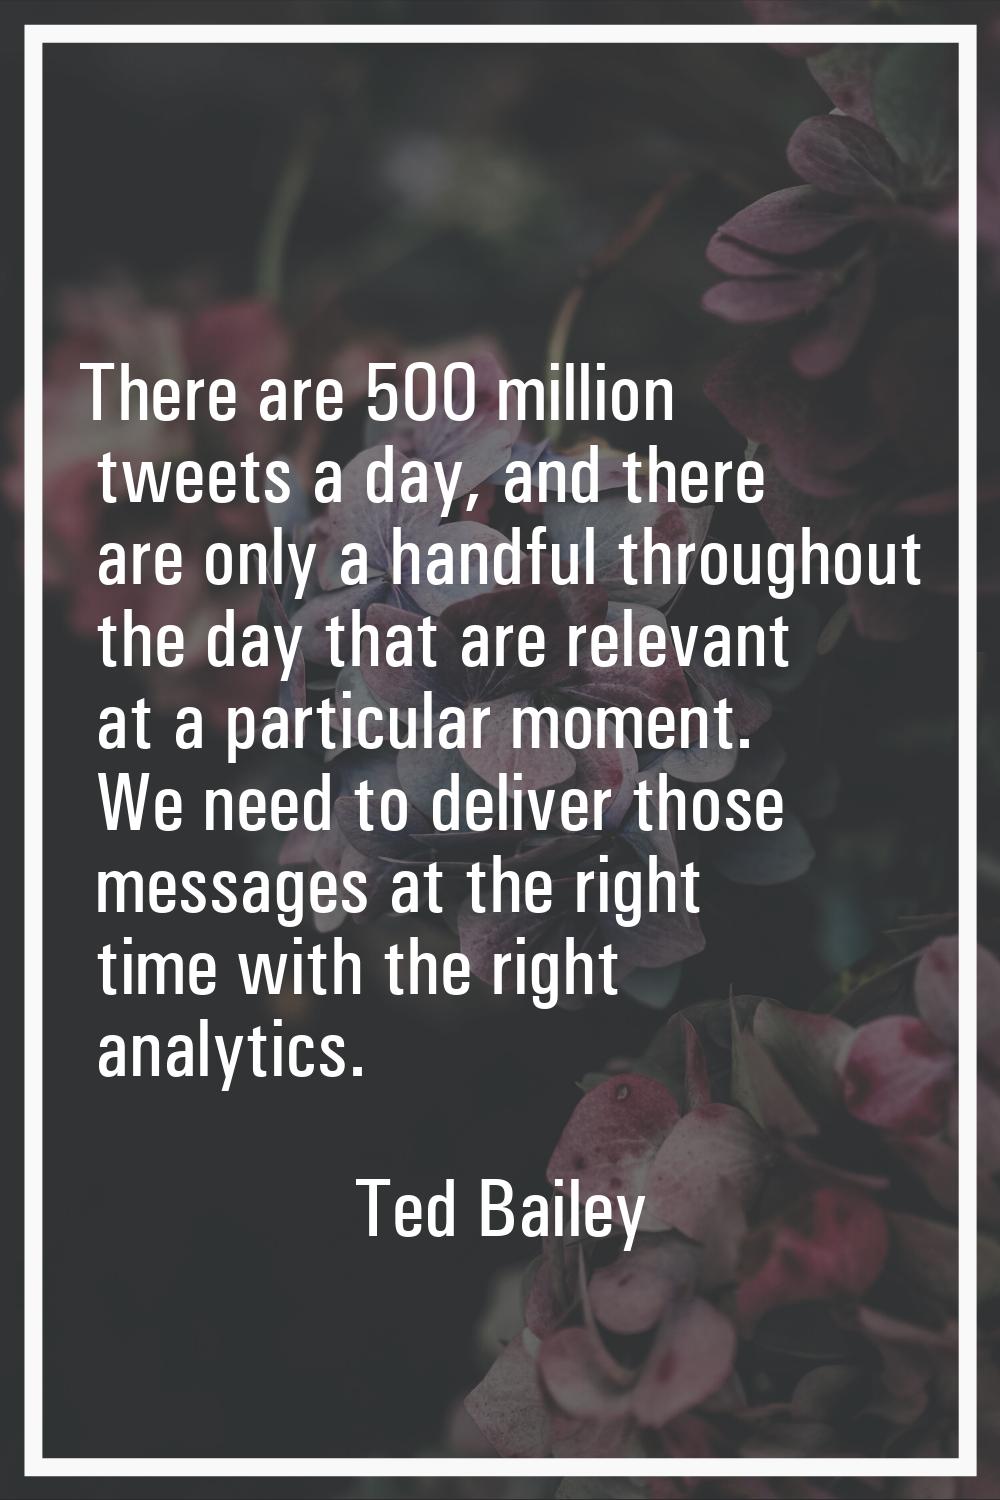 There are 500 million tweets a day, and there are only a handful throughout the day that are releva